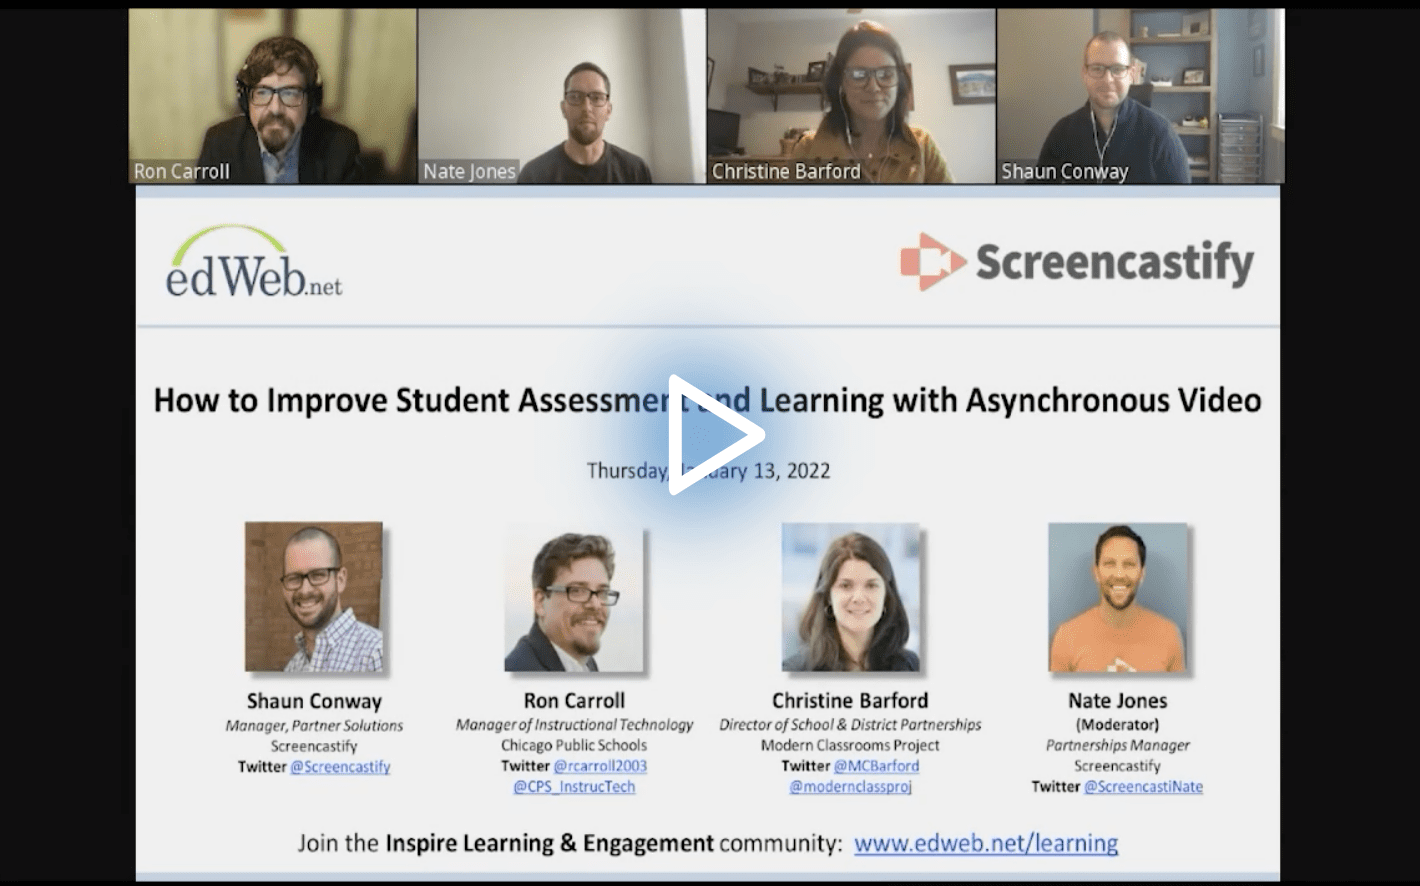 How to Improve Student Assessment and Learning with Asynchronous Video edLeader Panel recording link